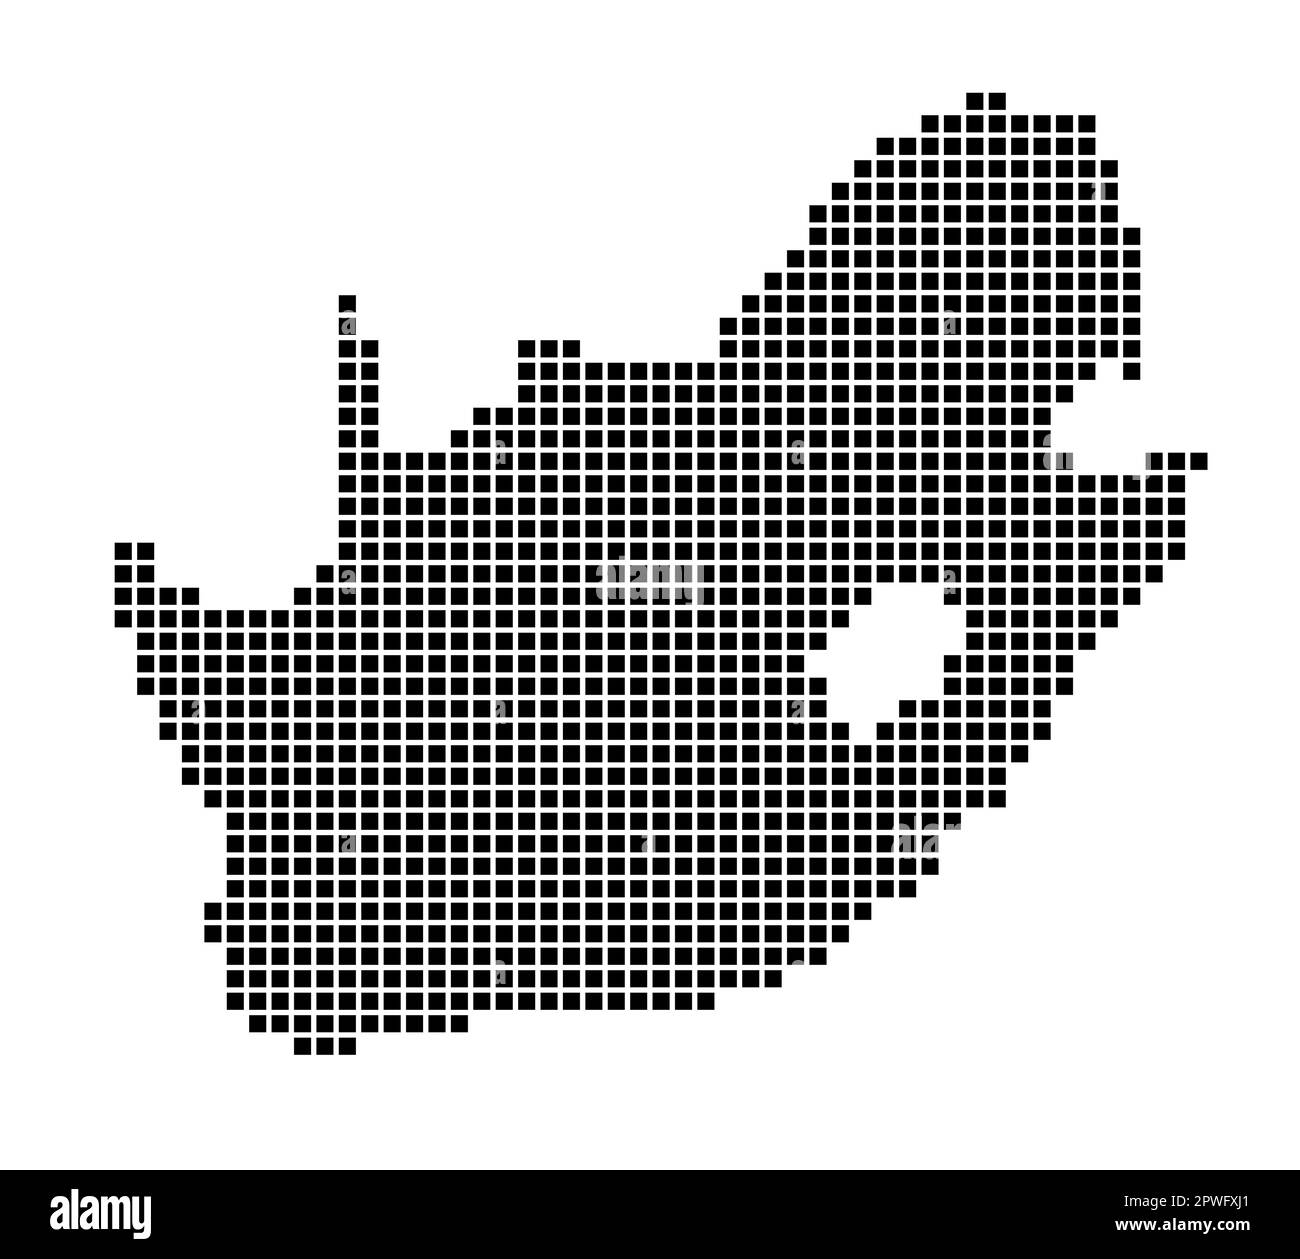 South Africa map. Map of South Africa in dotted style. Borders of the ...